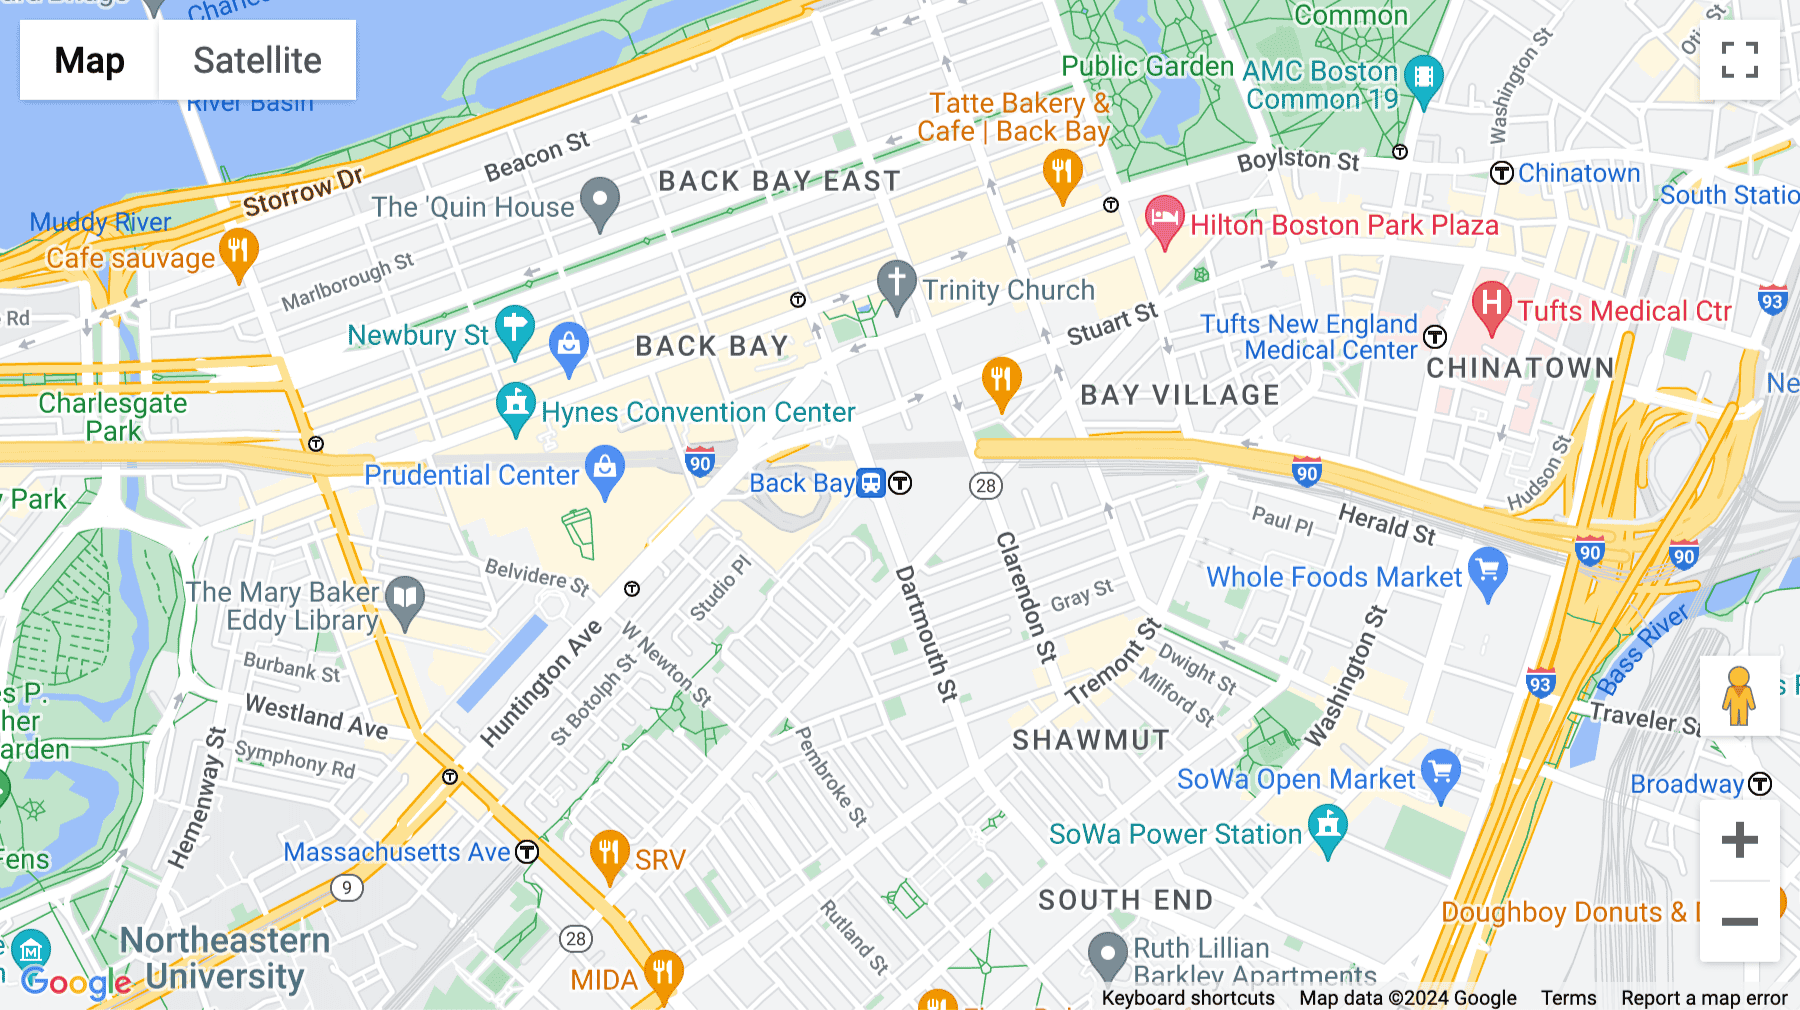 Click for interative map of 131 Dartmouth St, 3rd Floor, Boston